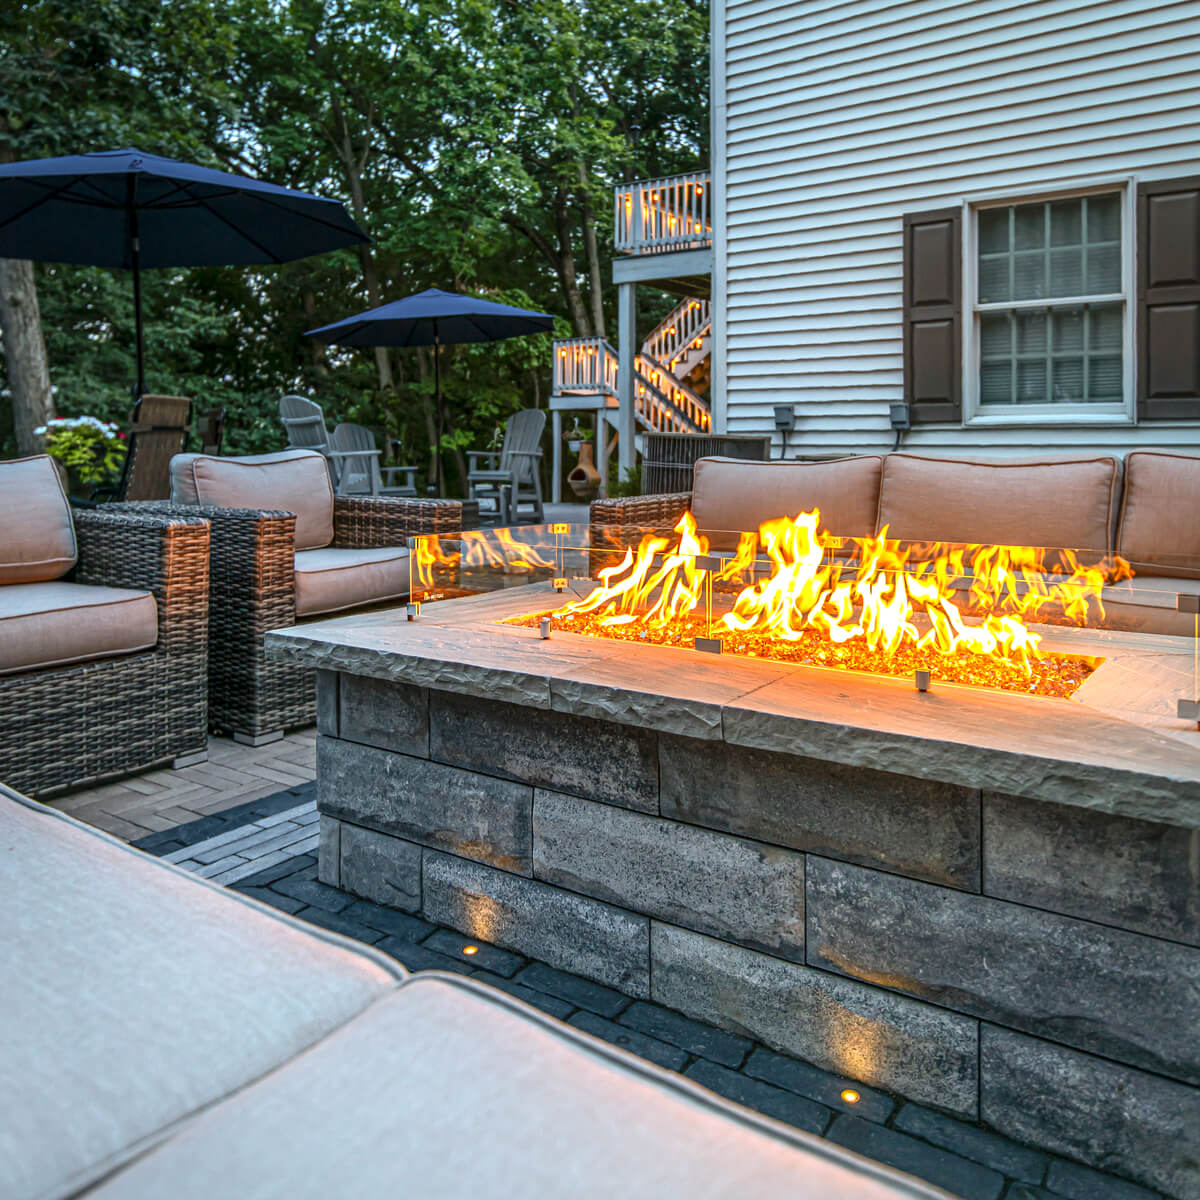 Unilock Outdoor Fire Table for Outdoor Living Space